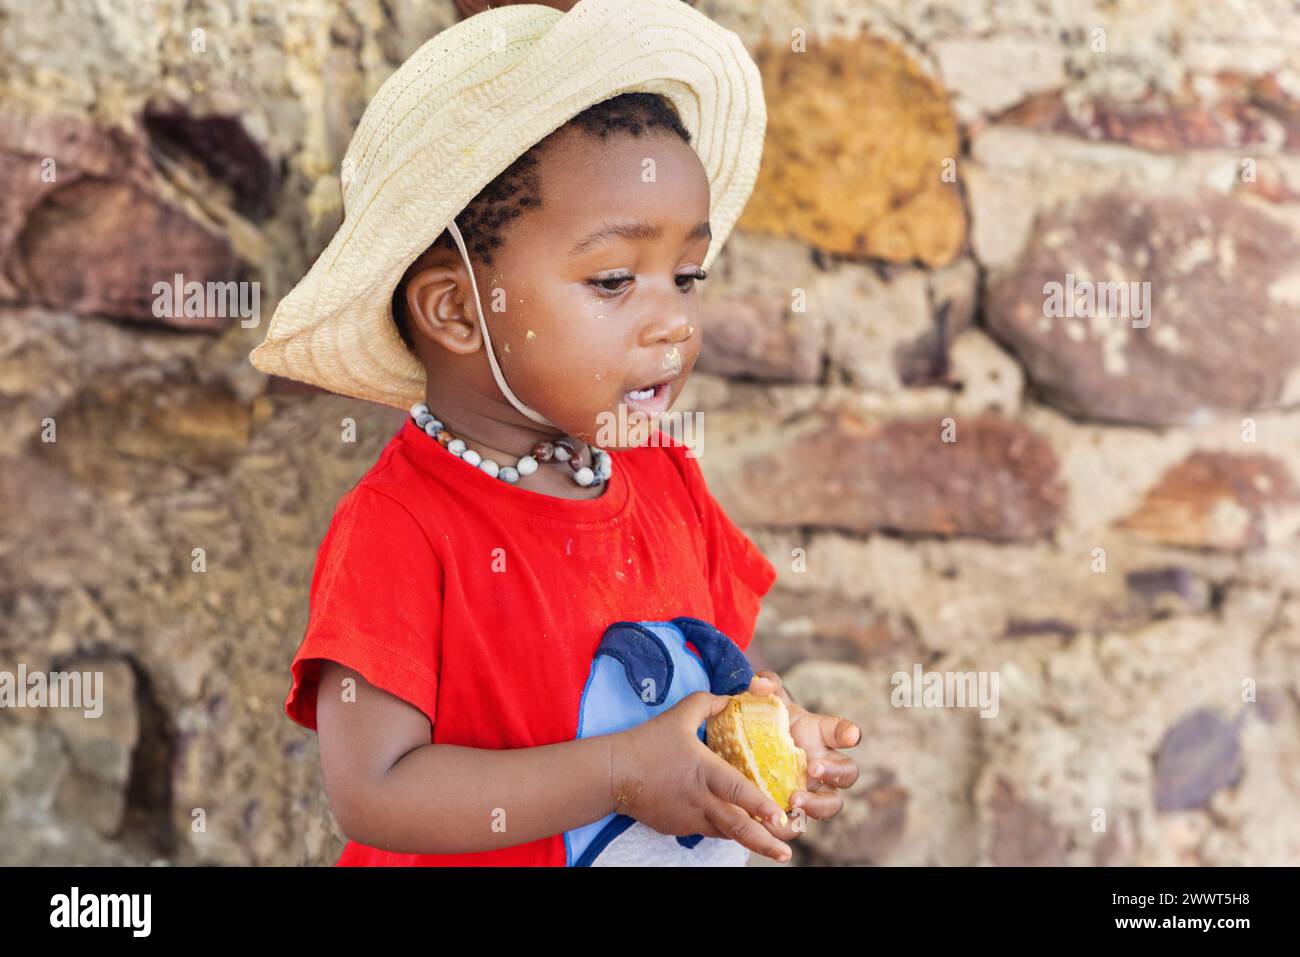 hungry young african girl eating biscuits, village life in a remote area Stock Photo